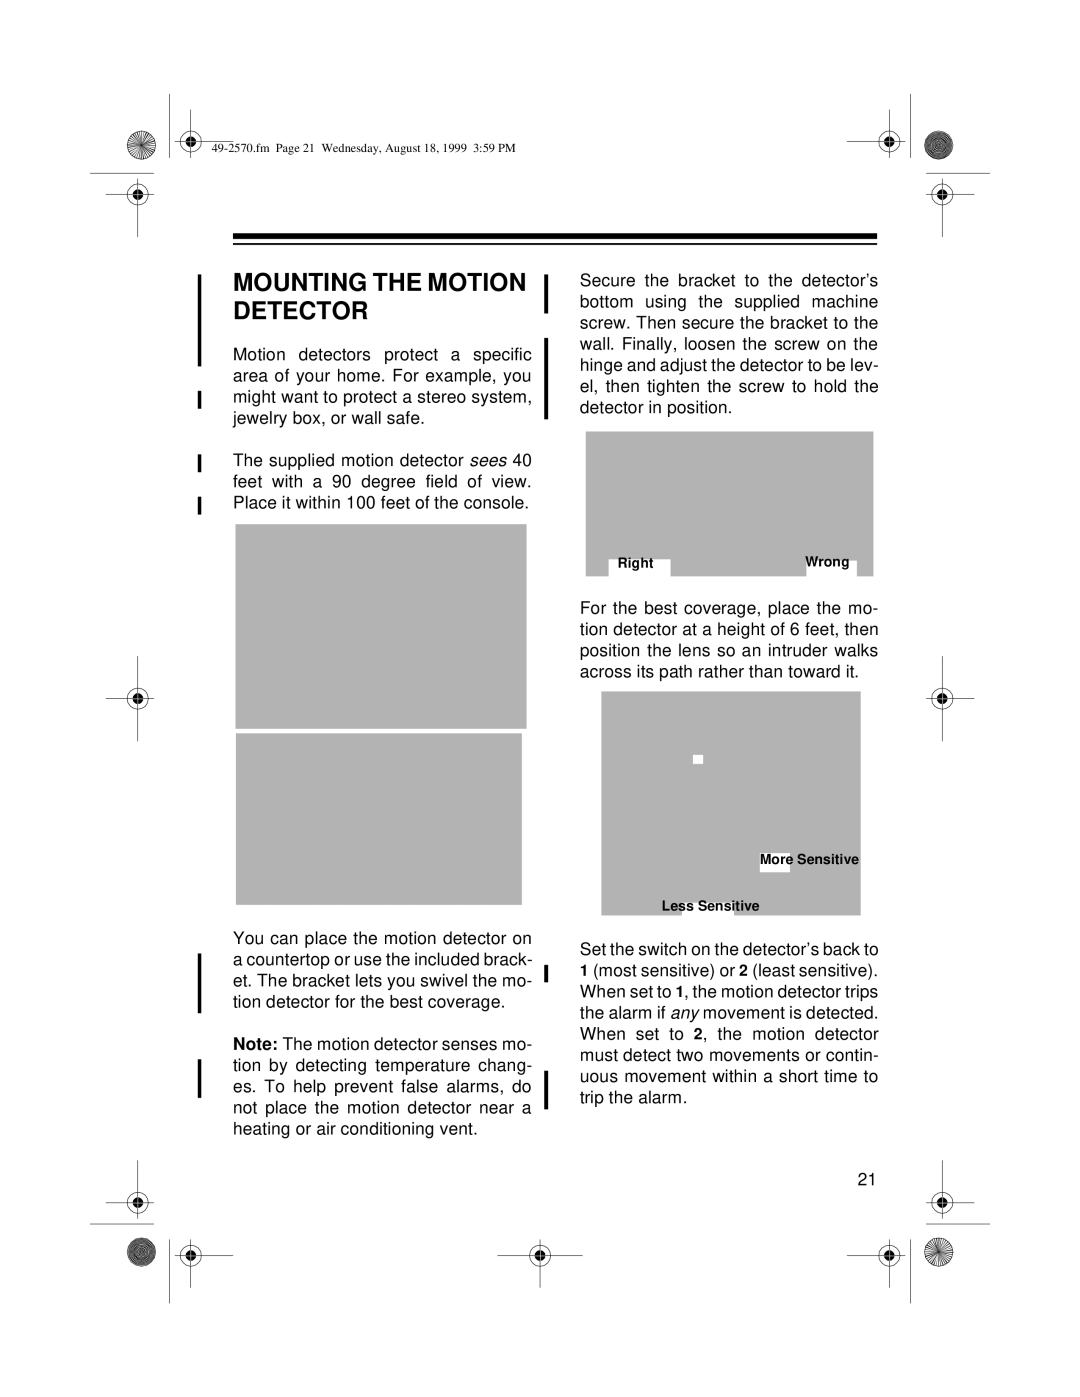 Radio Shack 49-2570 owner manual Mounting The Motion Detector 